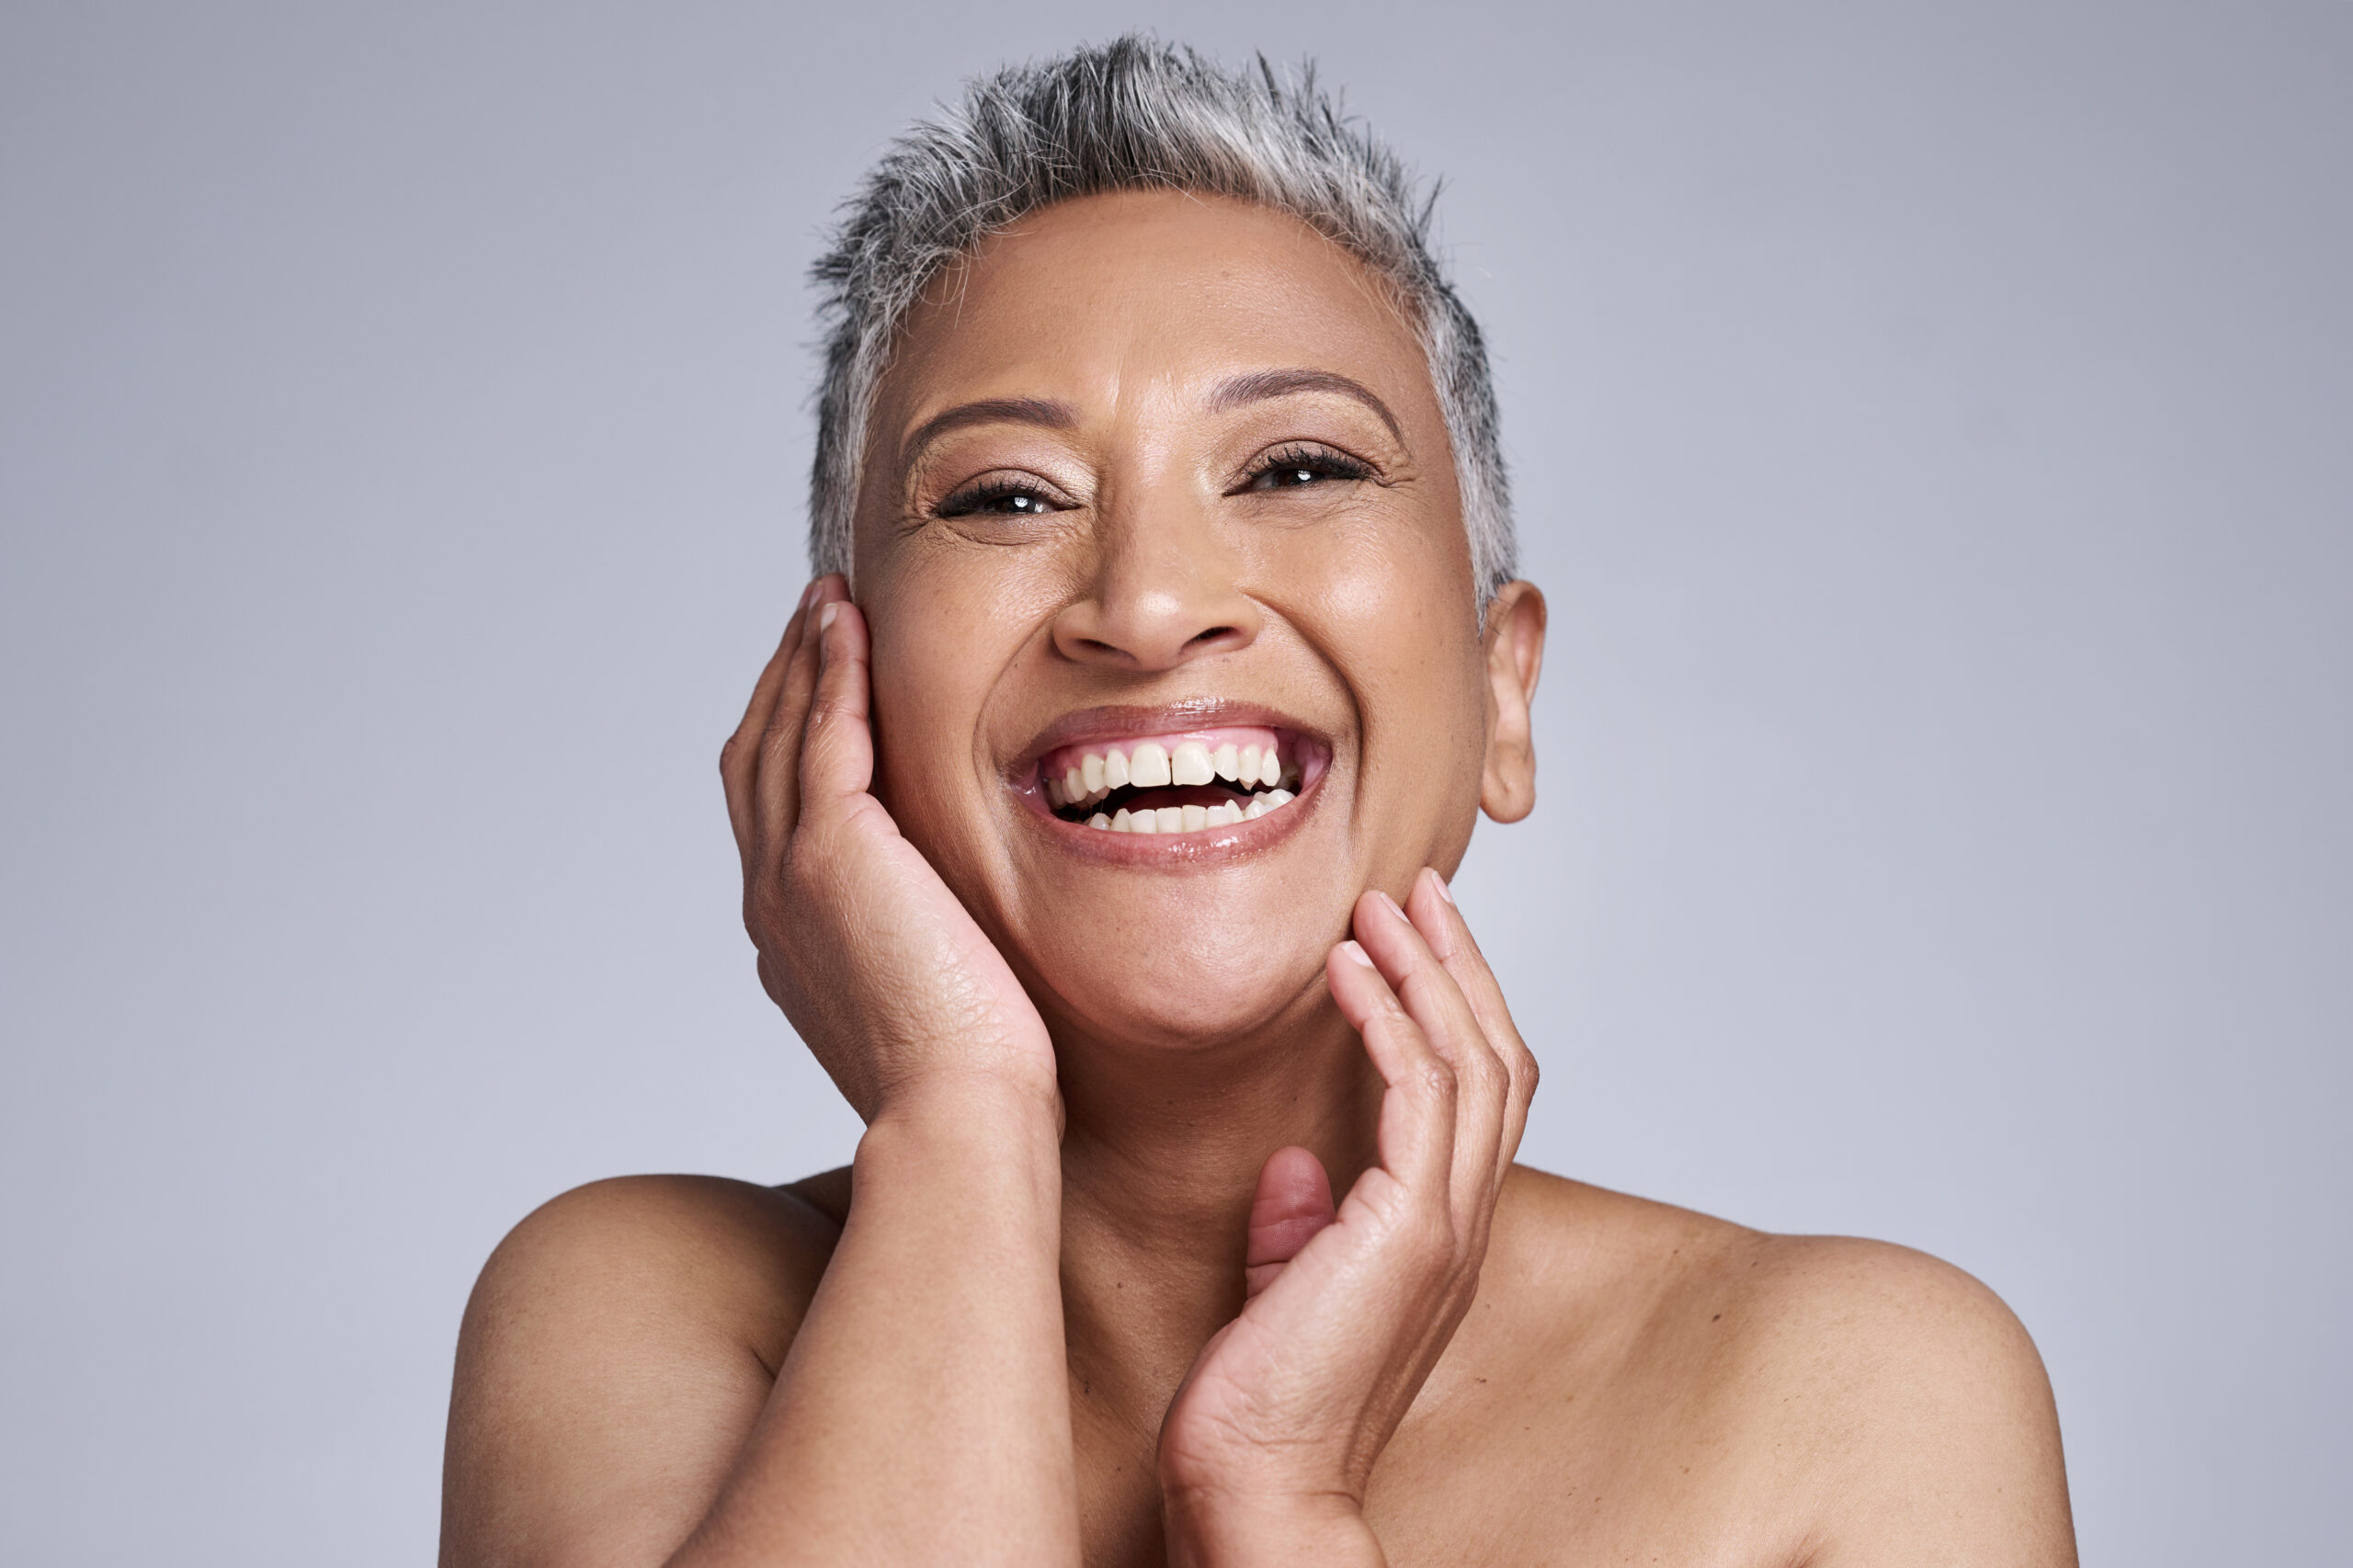 Skincare, makeup and senior woman excited about facial health, wellness and beauty against a grey mockup studio background. Smile, happy and face portrait of an elderly model for dermatology.